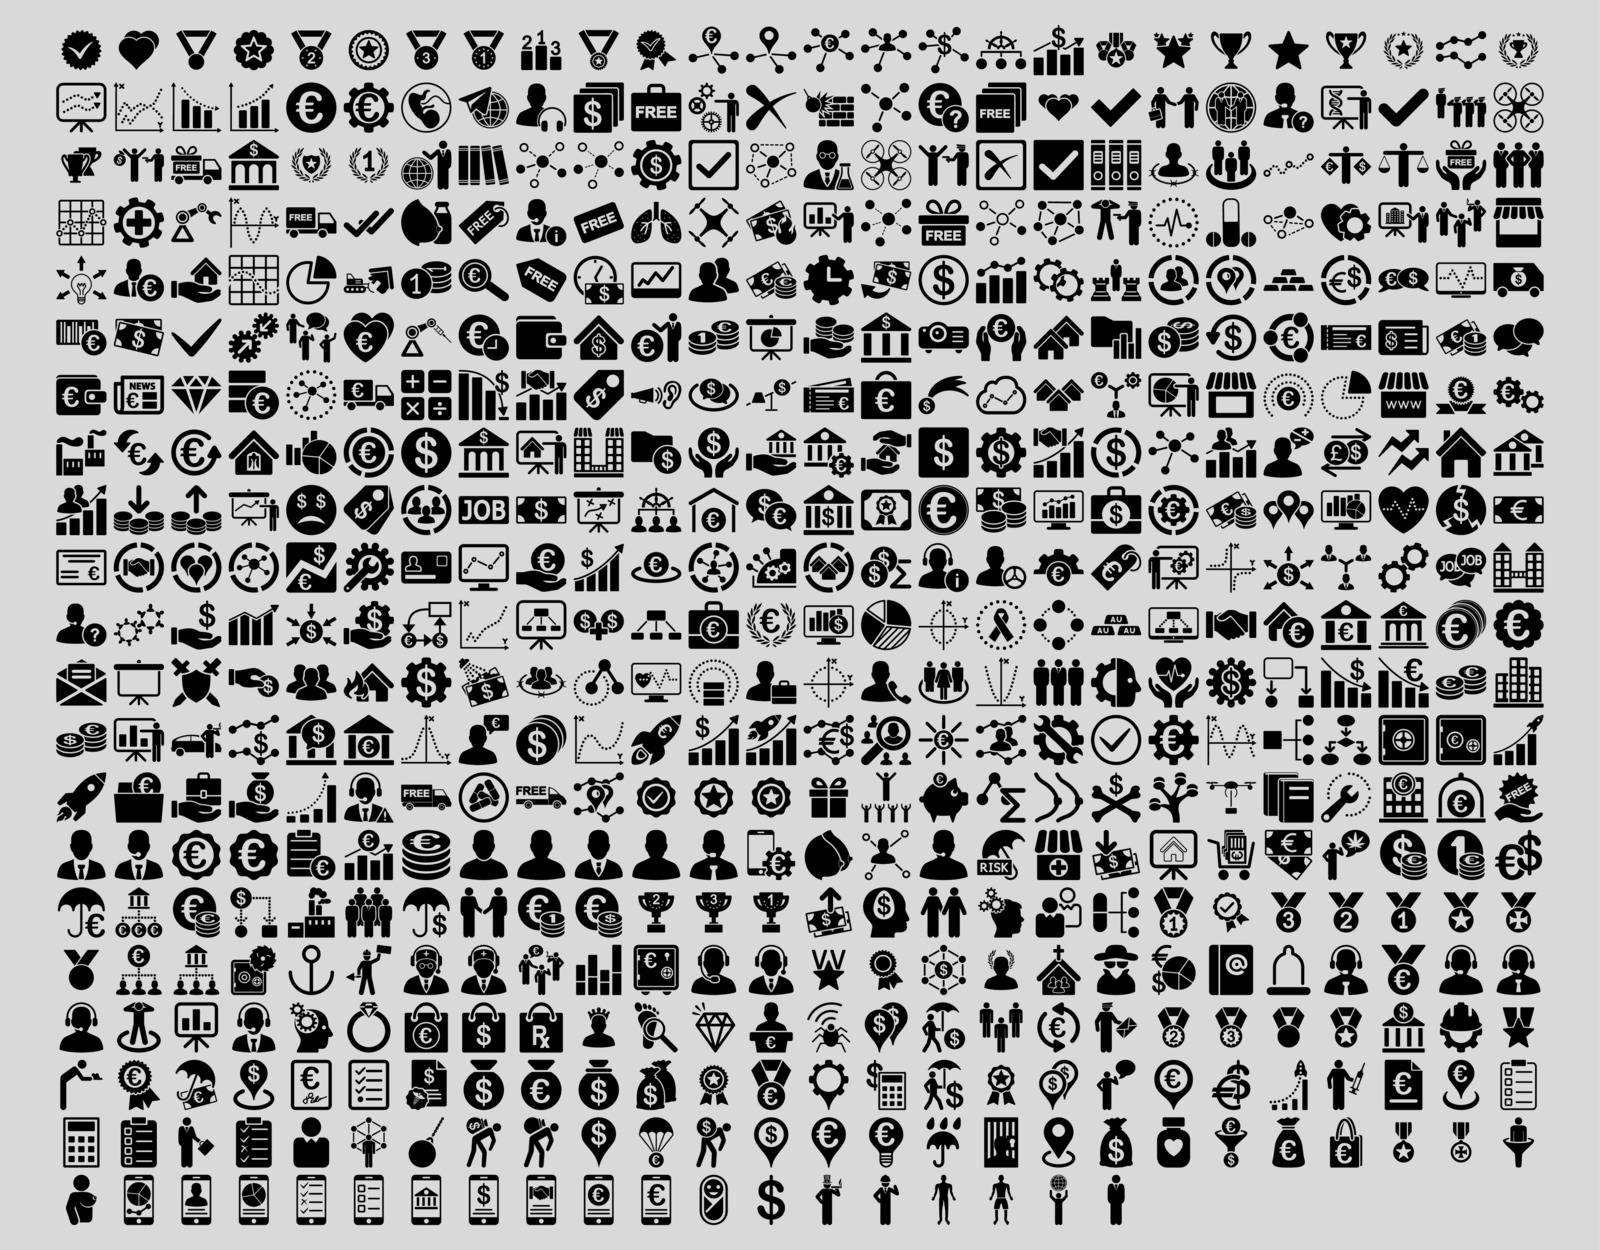 Application Toolbar Icons. 576 flat icons use black color. Vector images are isolated on a light gray background. 